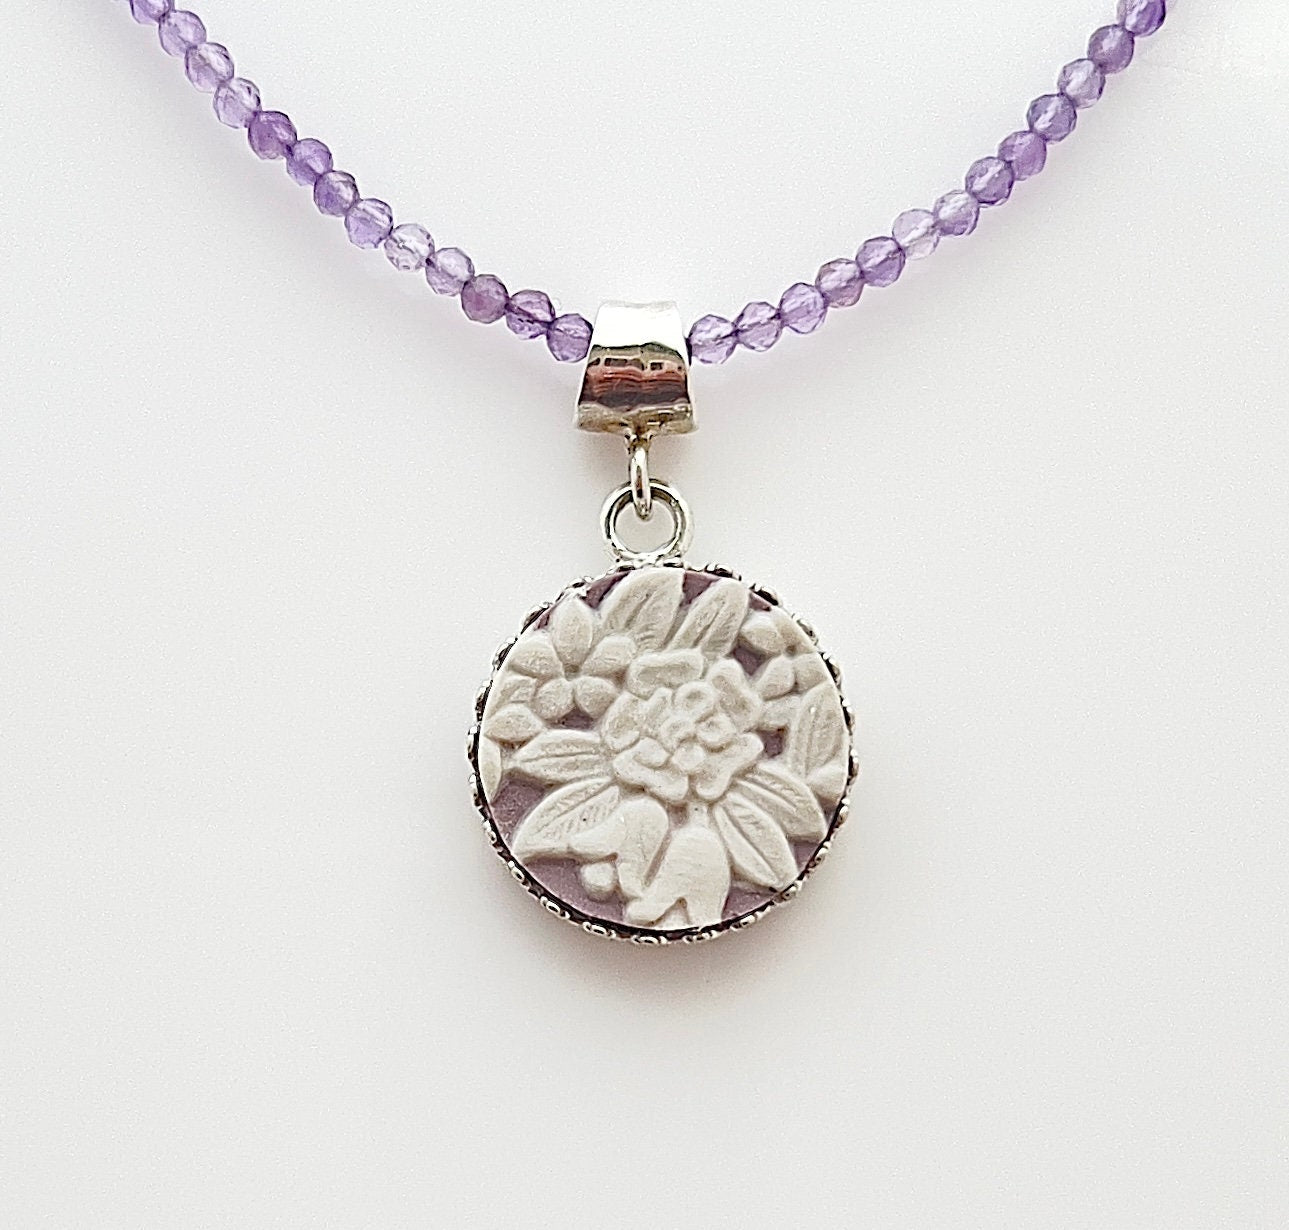 Wedgwood Lilac Jasperware Necklace, 9th Anniversary Pottery Gift for Wife, Purple Amethyst